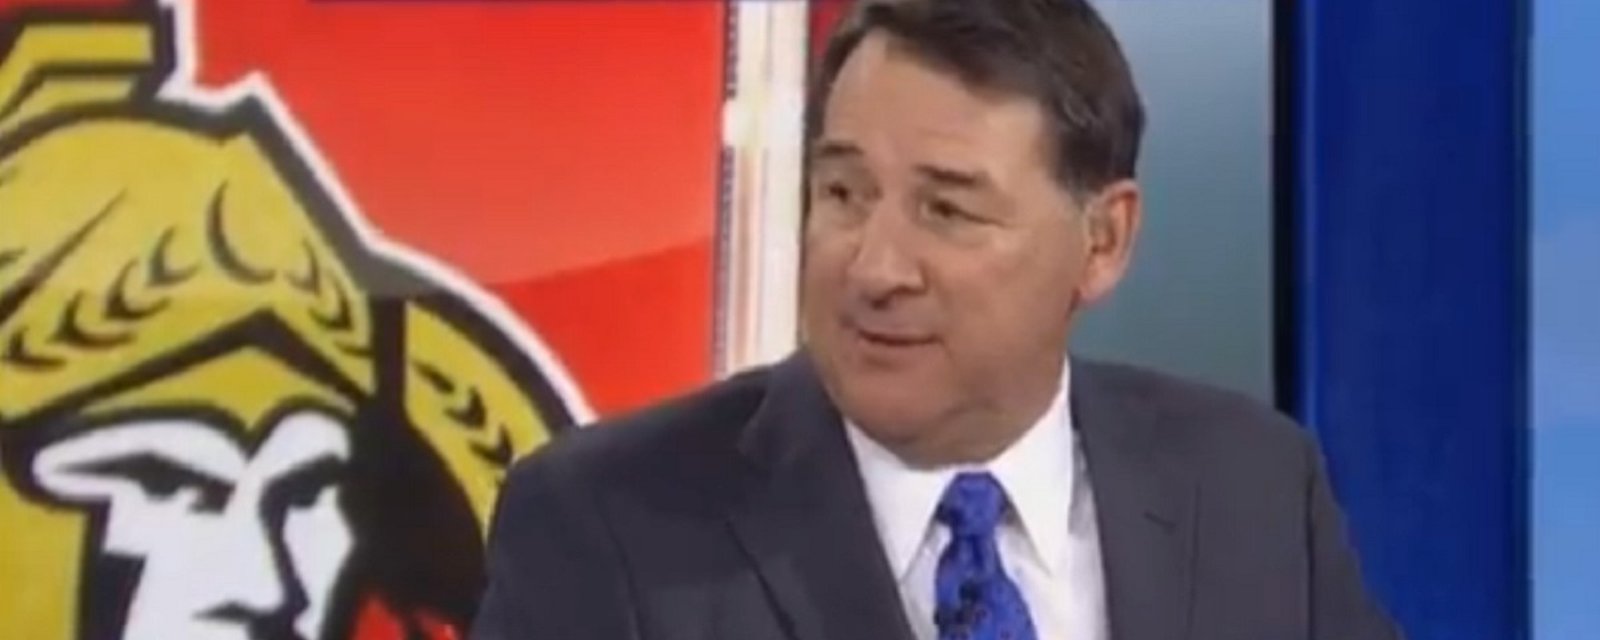 Milbury does it again, calls for players to intentionally hurt each other in the playoffs.